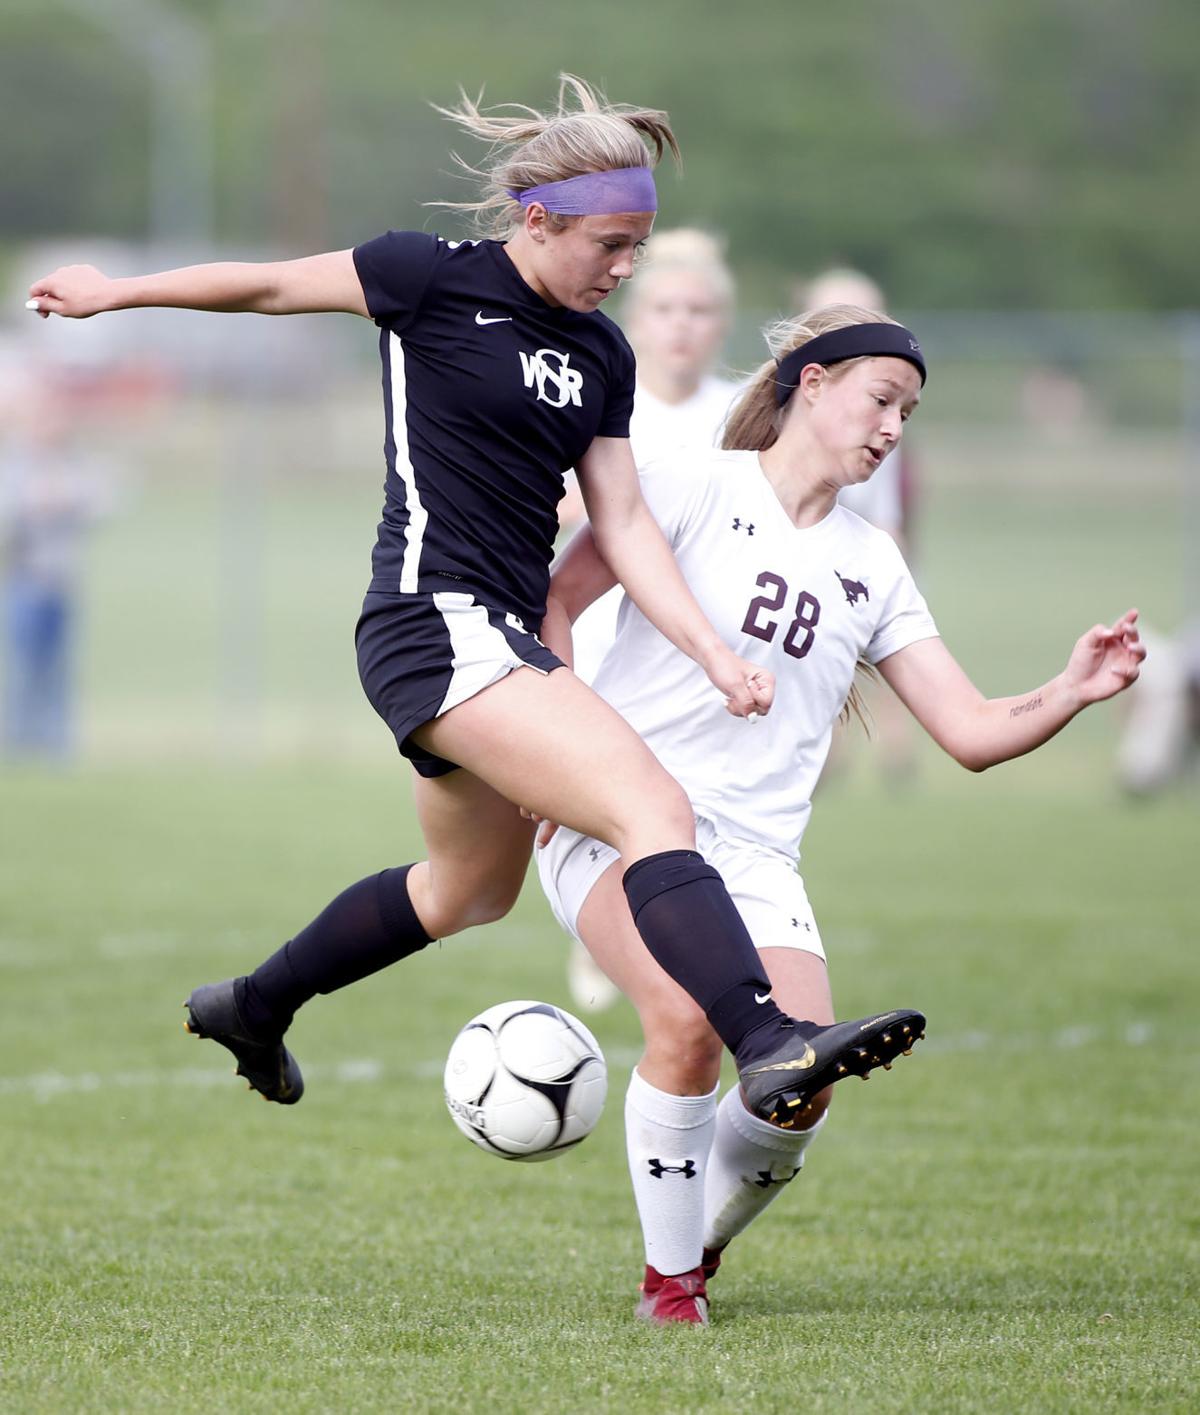 Girls Soccer Waverly Shell Rock Races To State Photos Soccer Wcfcourier Com